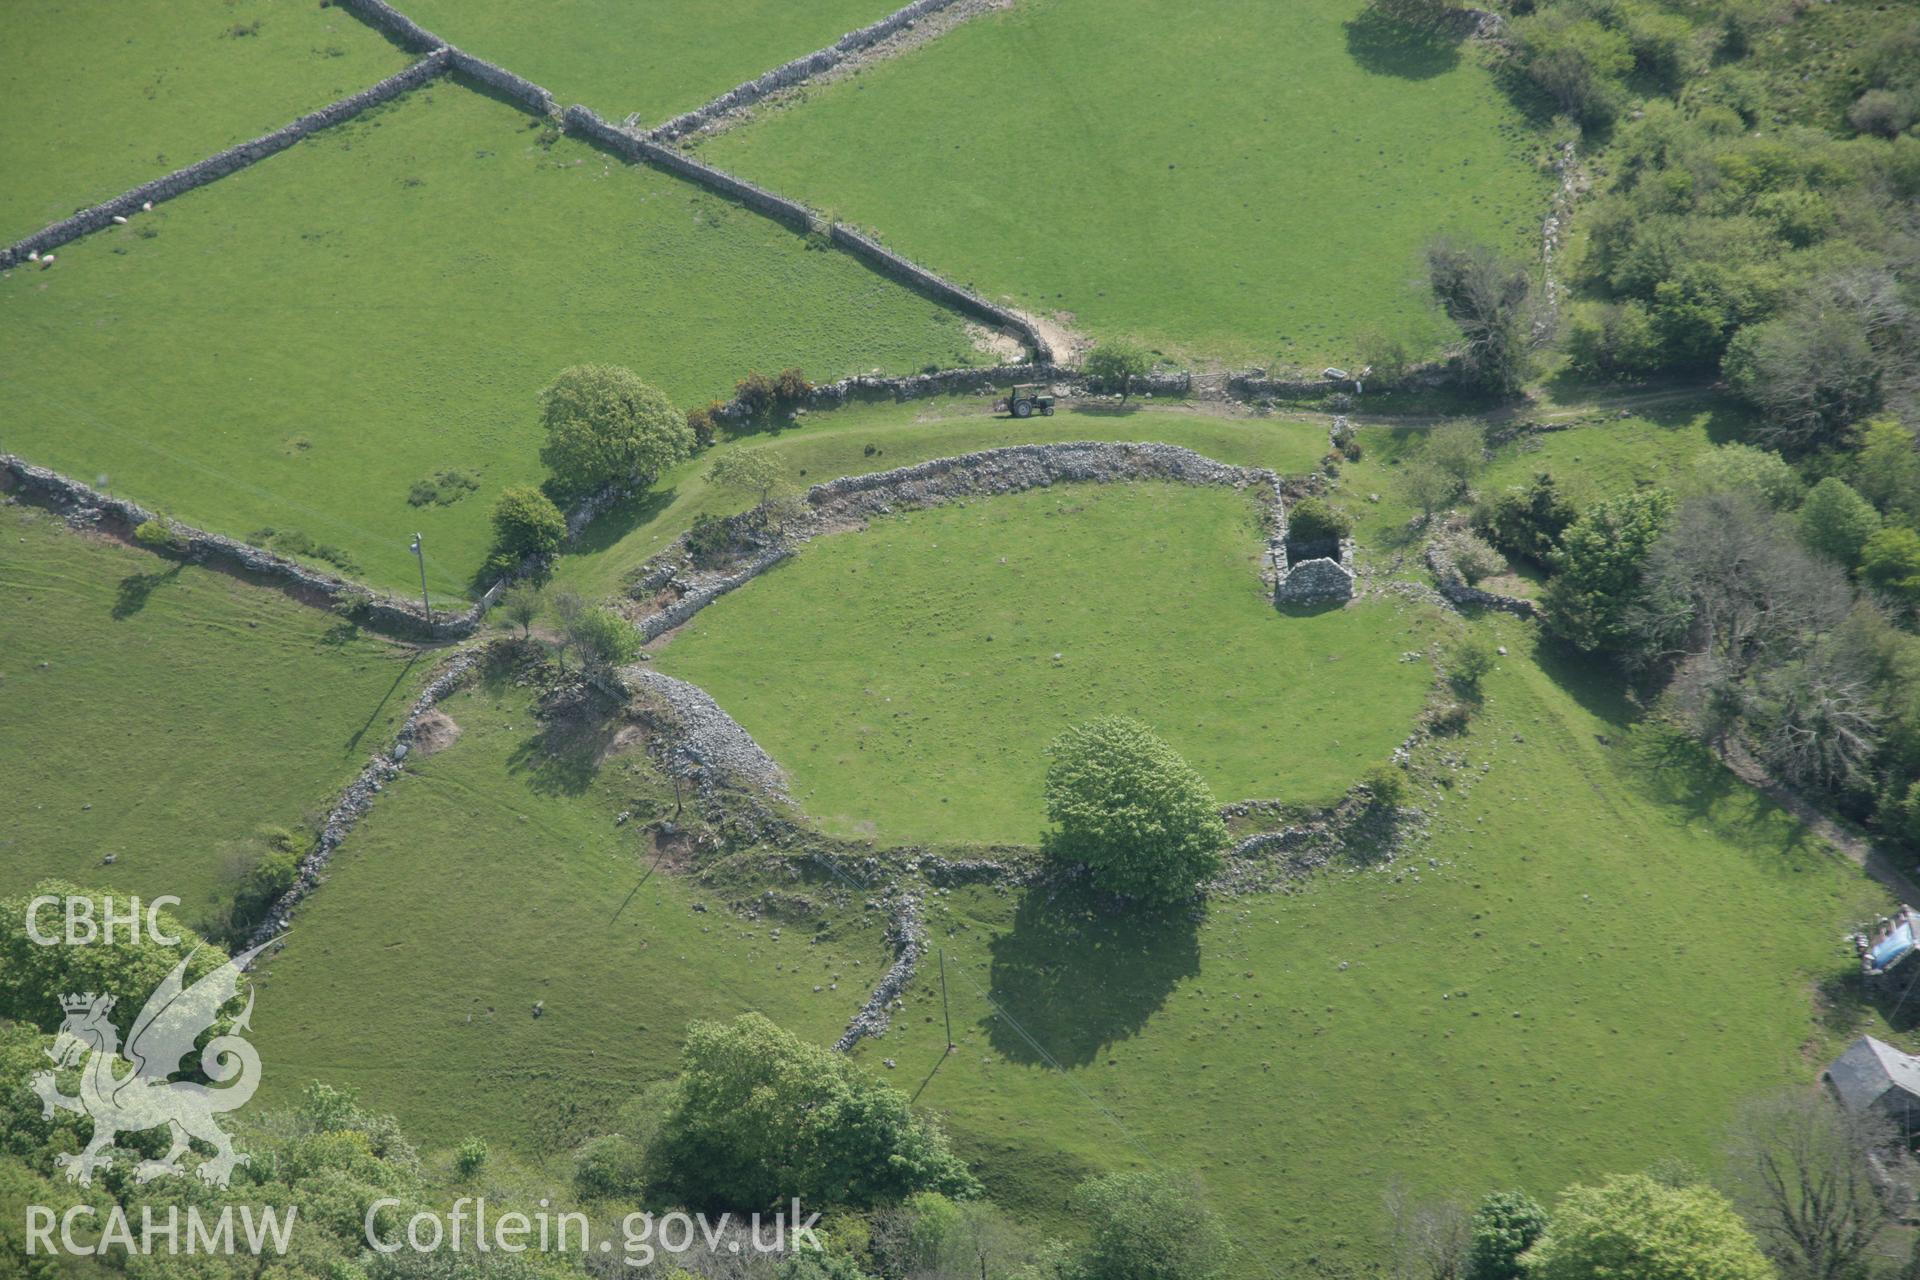 RCAHMW digital colour oblique photograph of Byrllysg Iron Age Promontory Fort. Taken on 17/05/2005 by T.G. Driver.